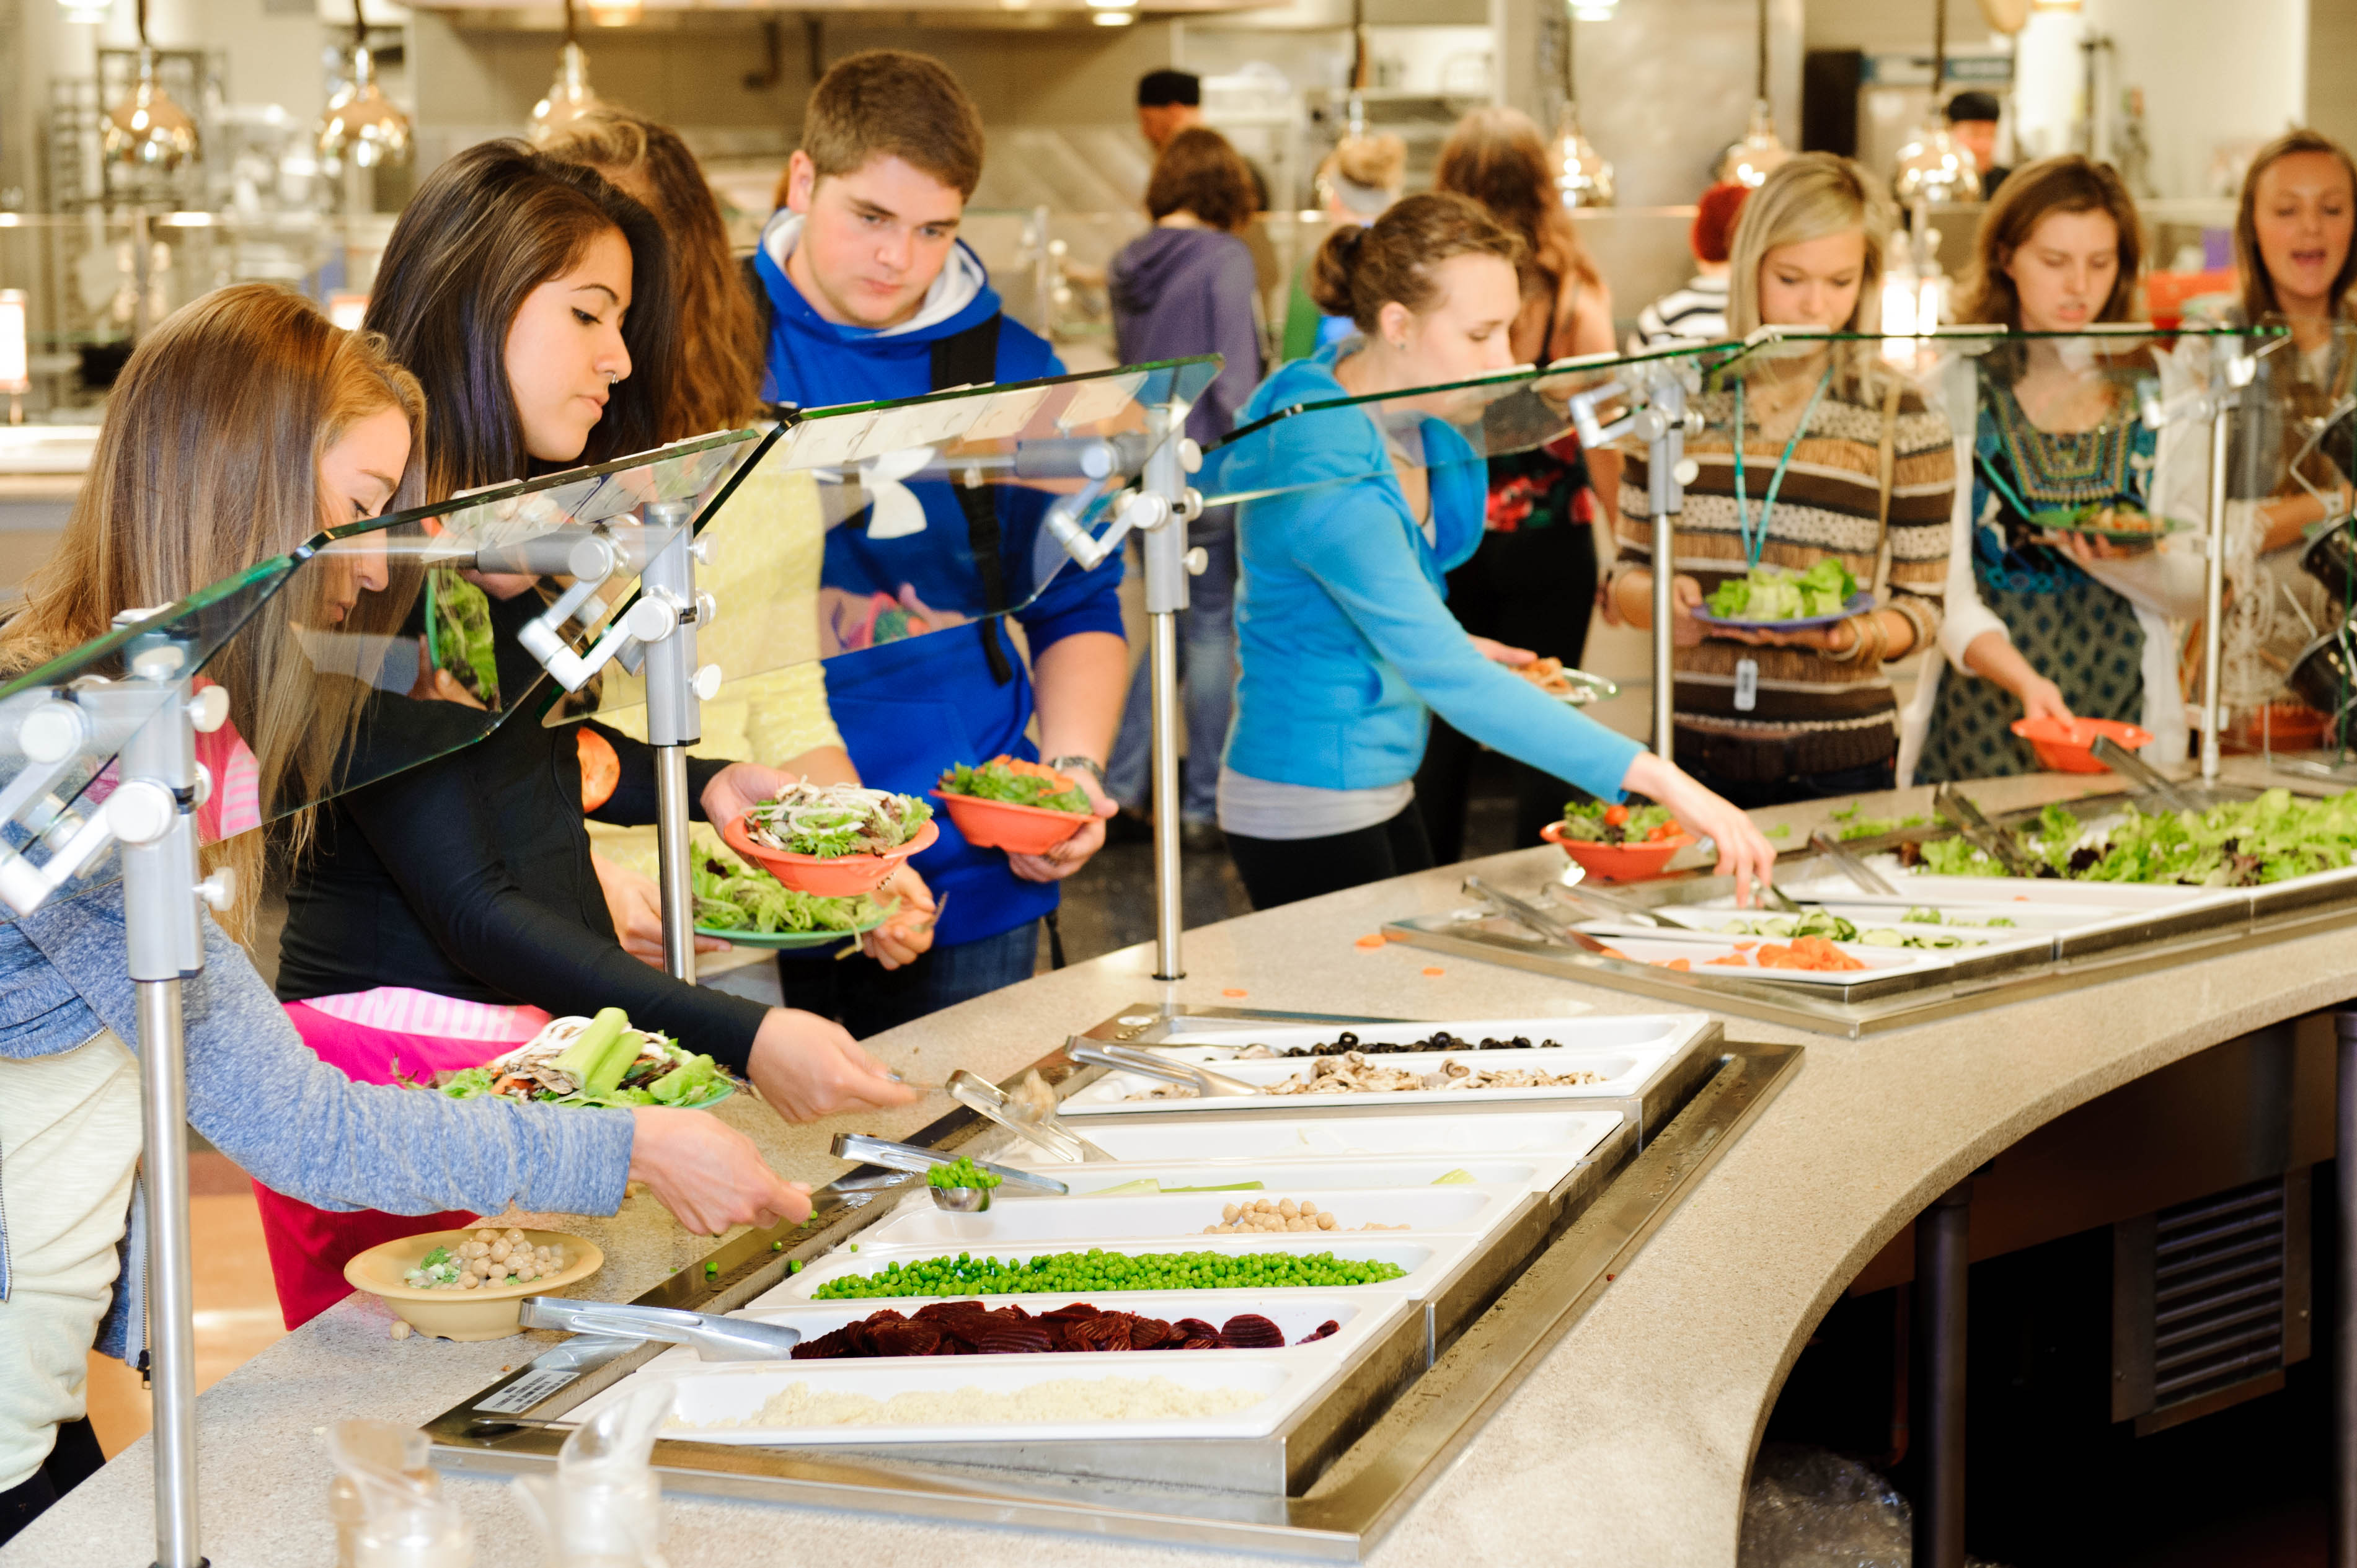 Students serve themselves food at a residential dining hall